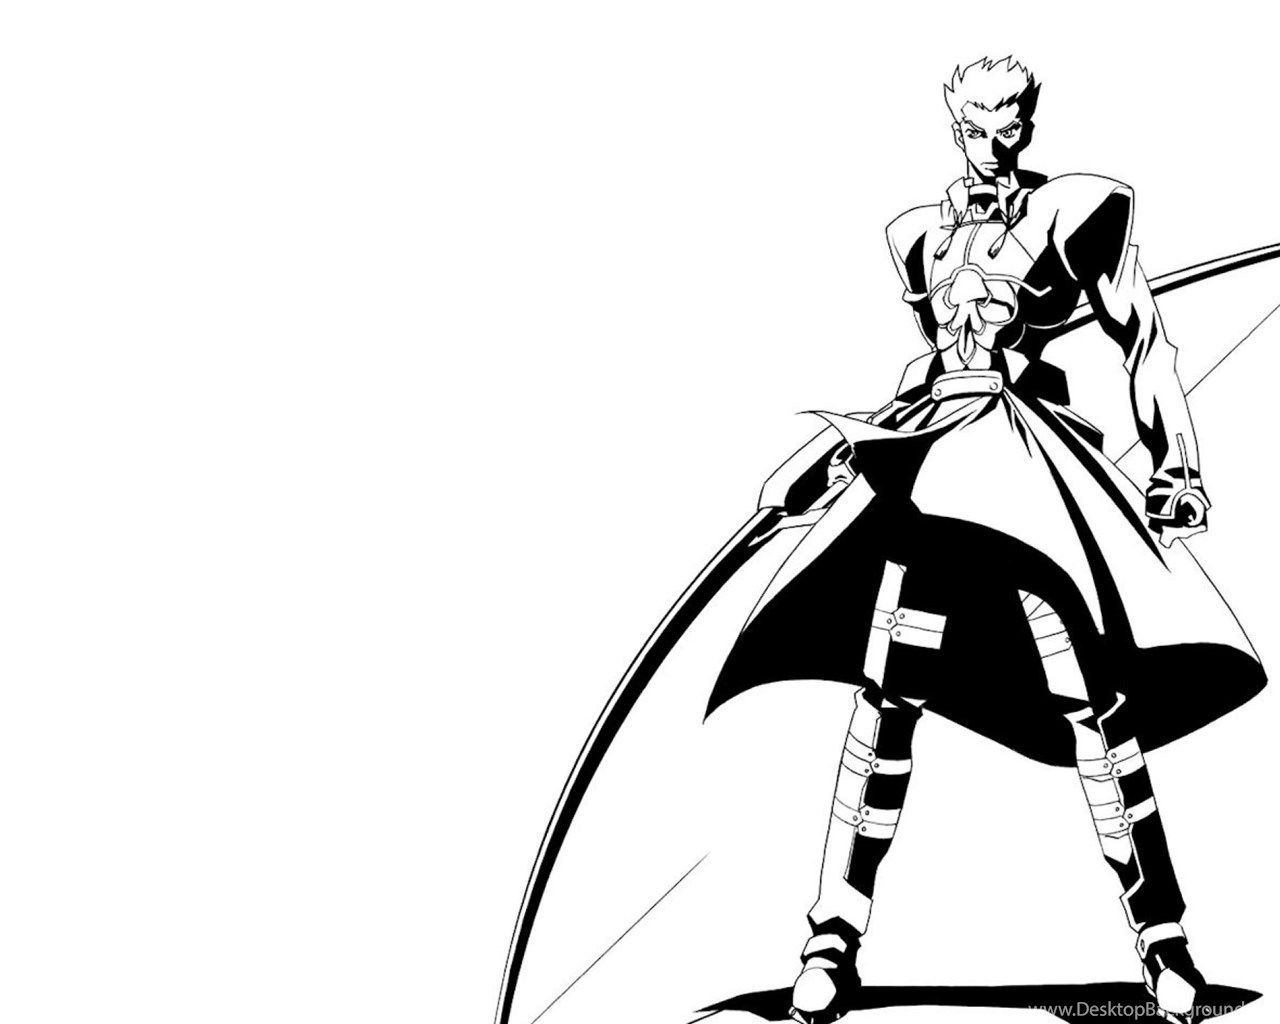 Download Wallpapers 2560x1440 Anime, Boy, Black And White, Arms